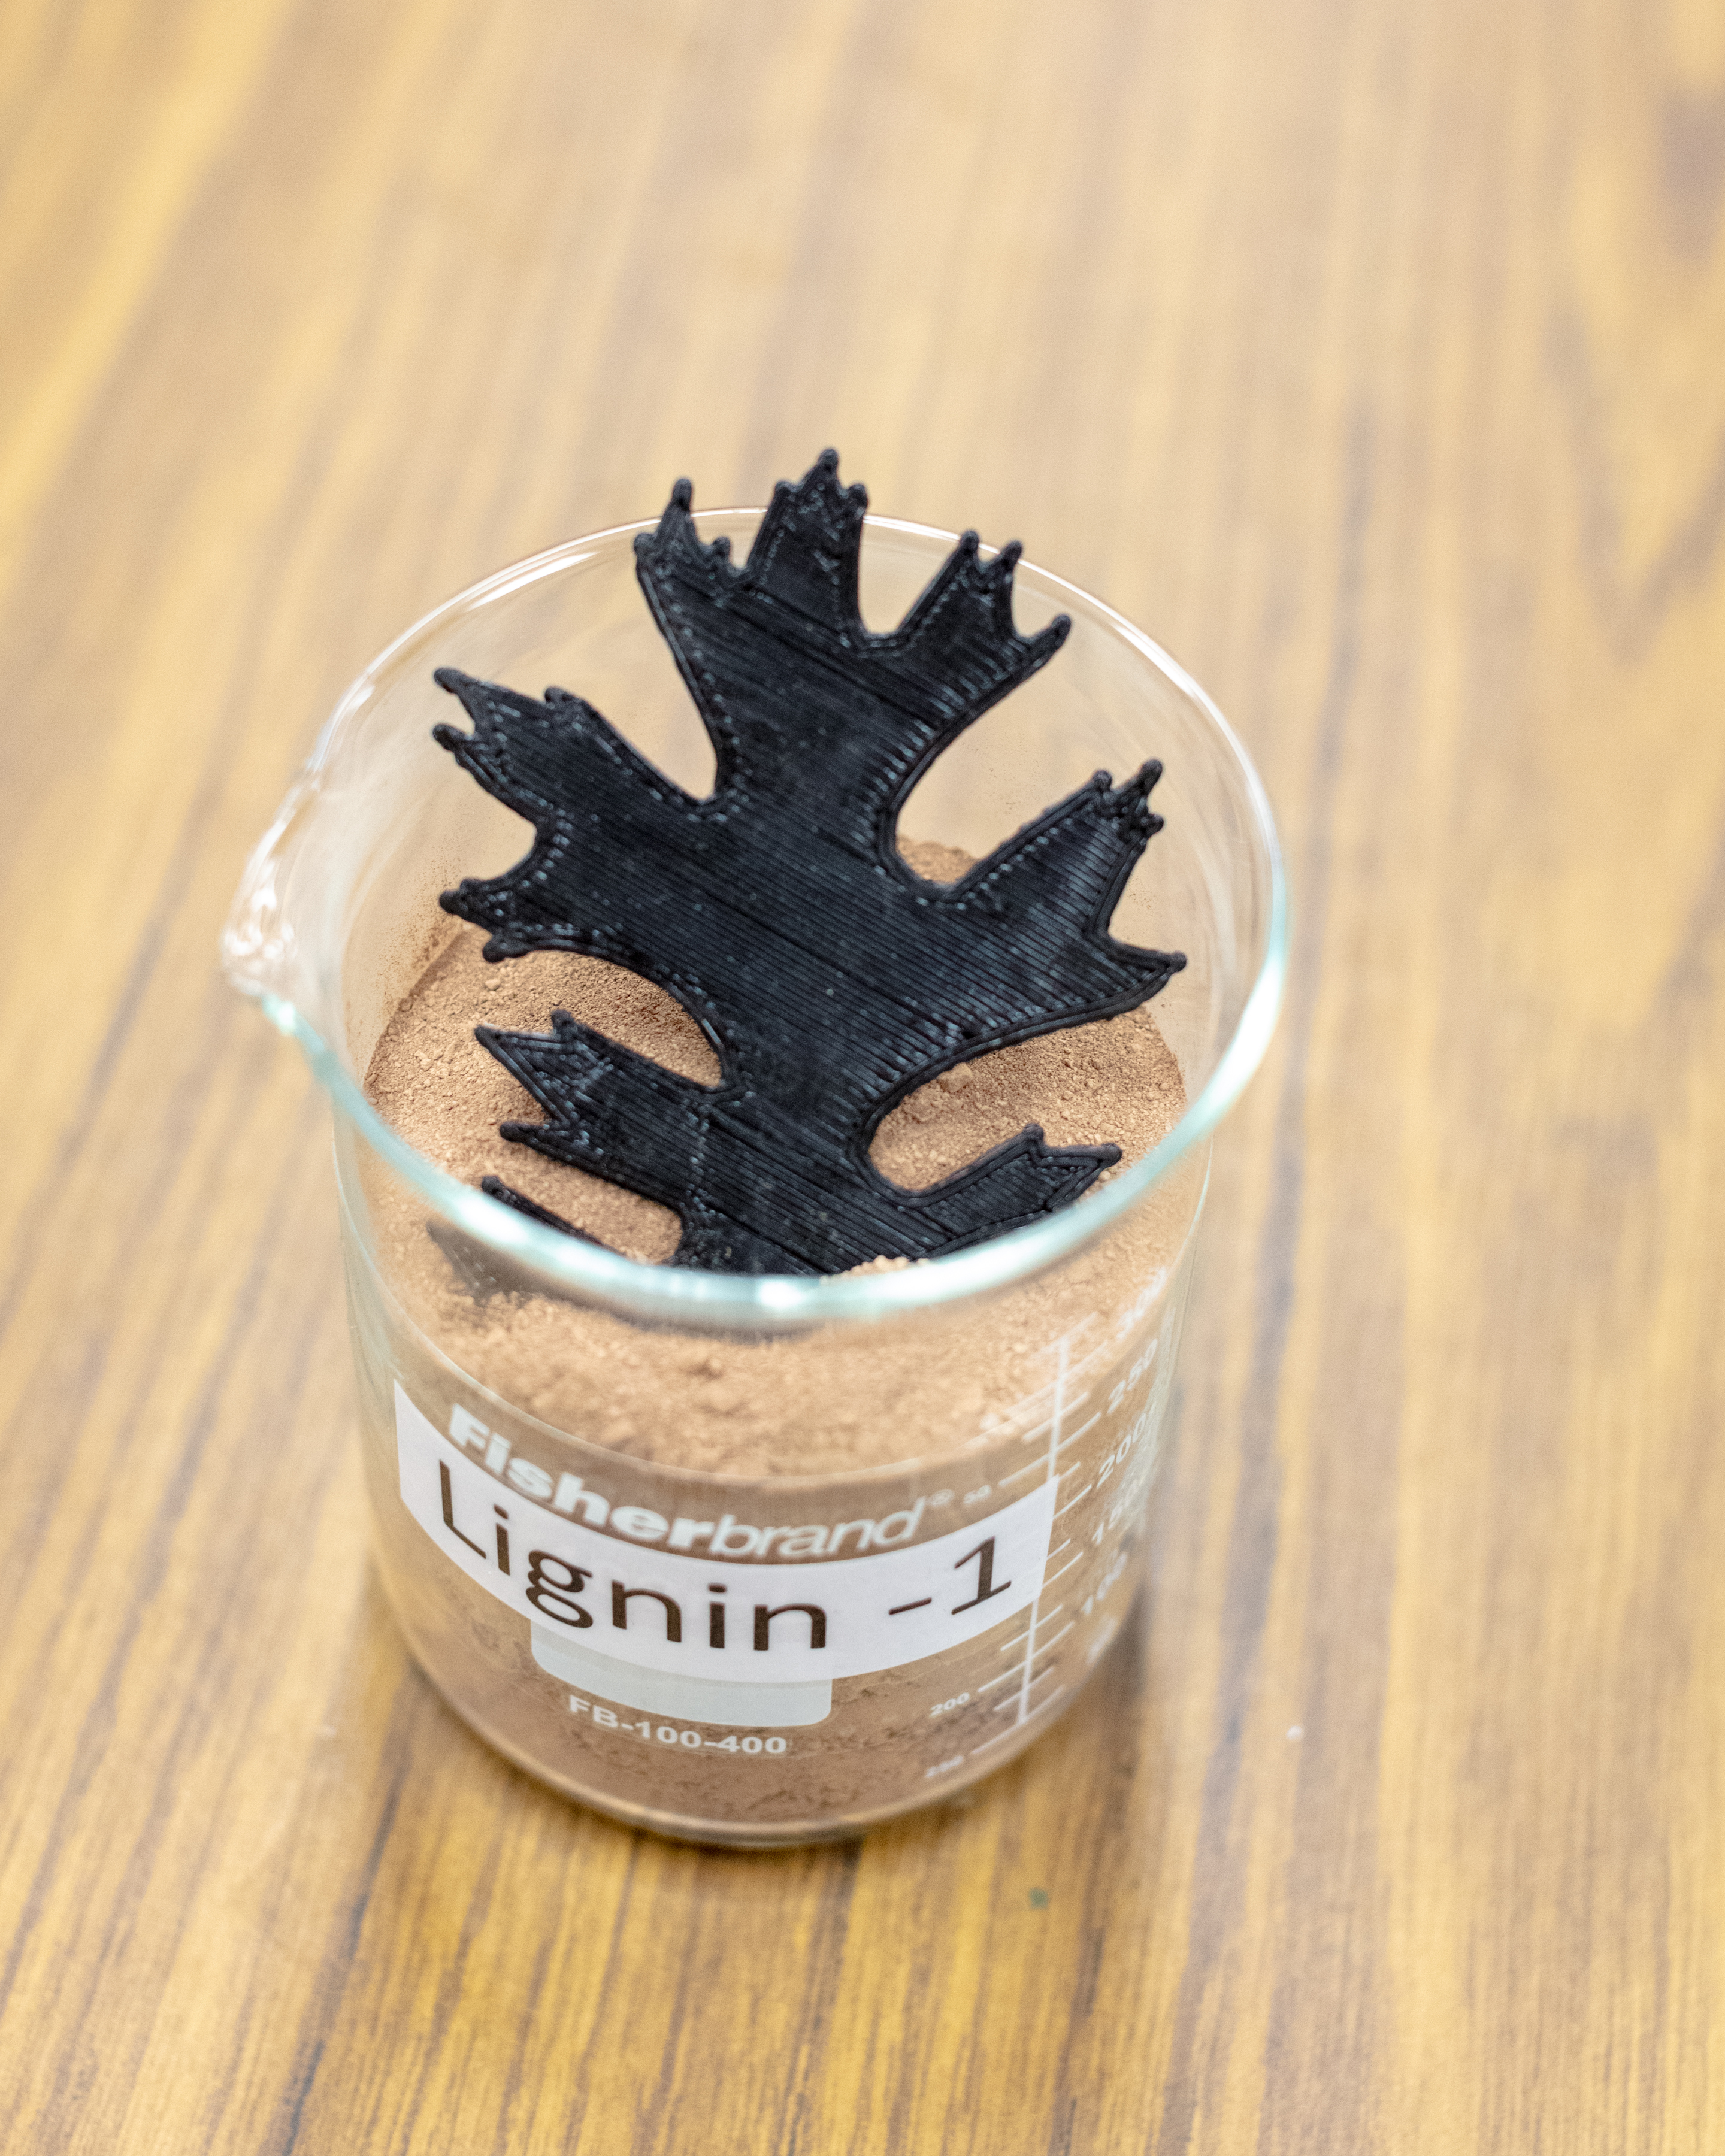 Using as much as 50% lignin by weight, the new composite material created at ORNL is suitable for use in 3D printing.